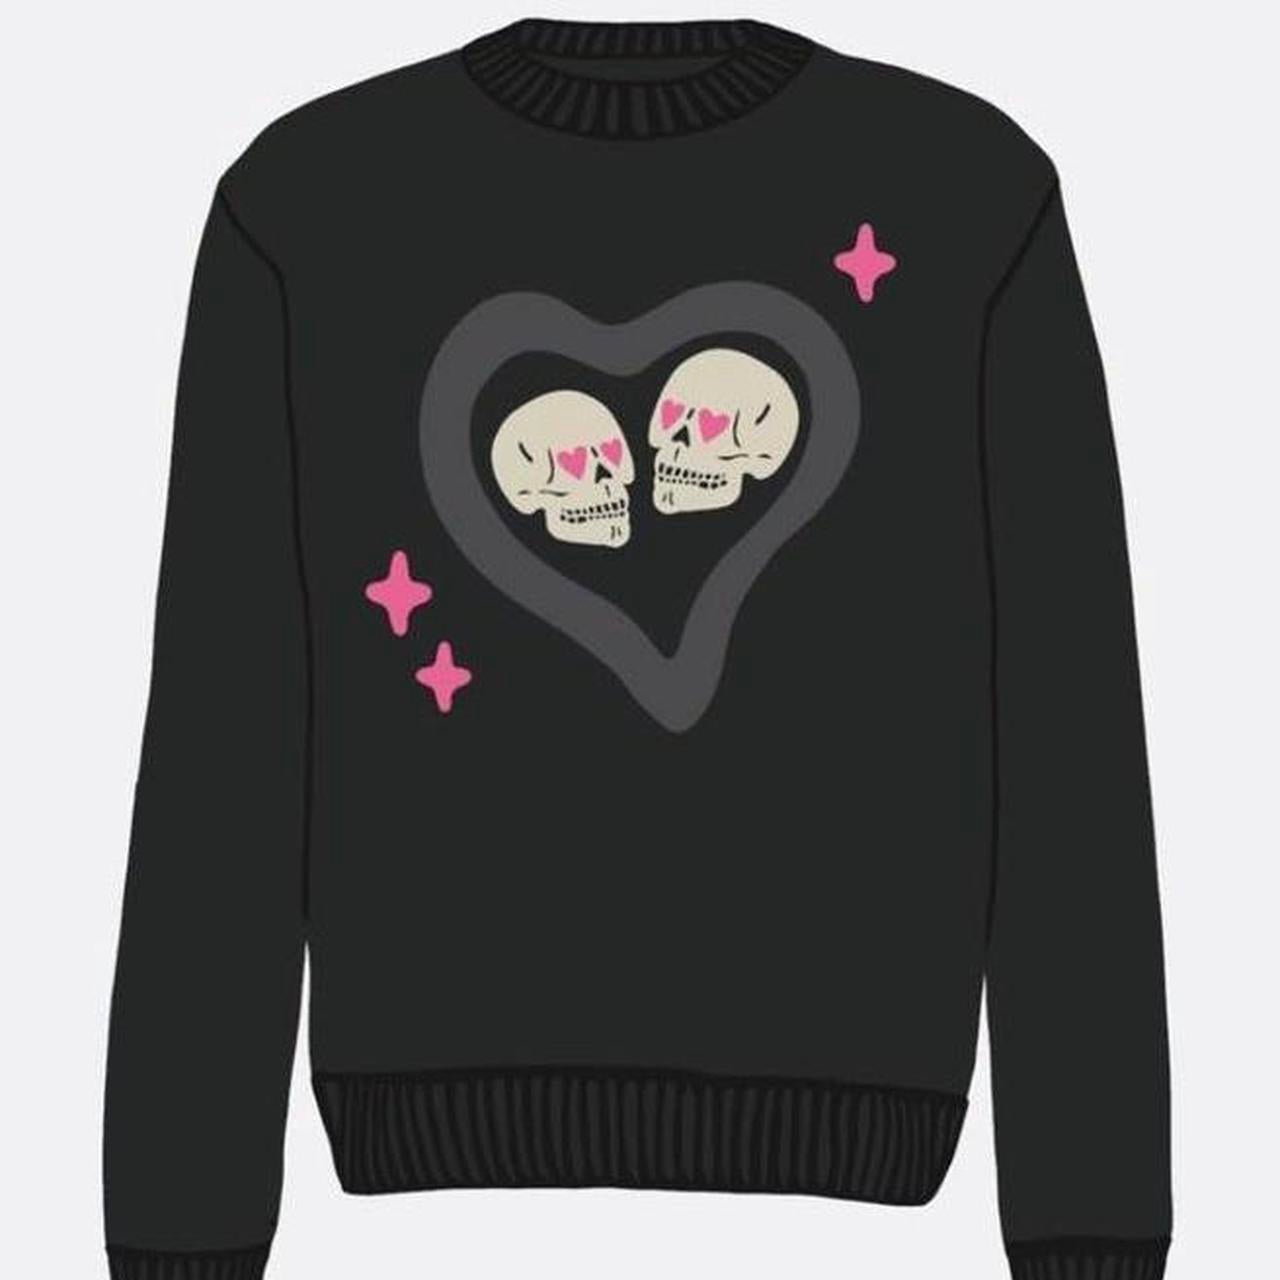 Broken Planet Market 'Hearts Are Meant To Be Broken' Knit Sweater Soot Black